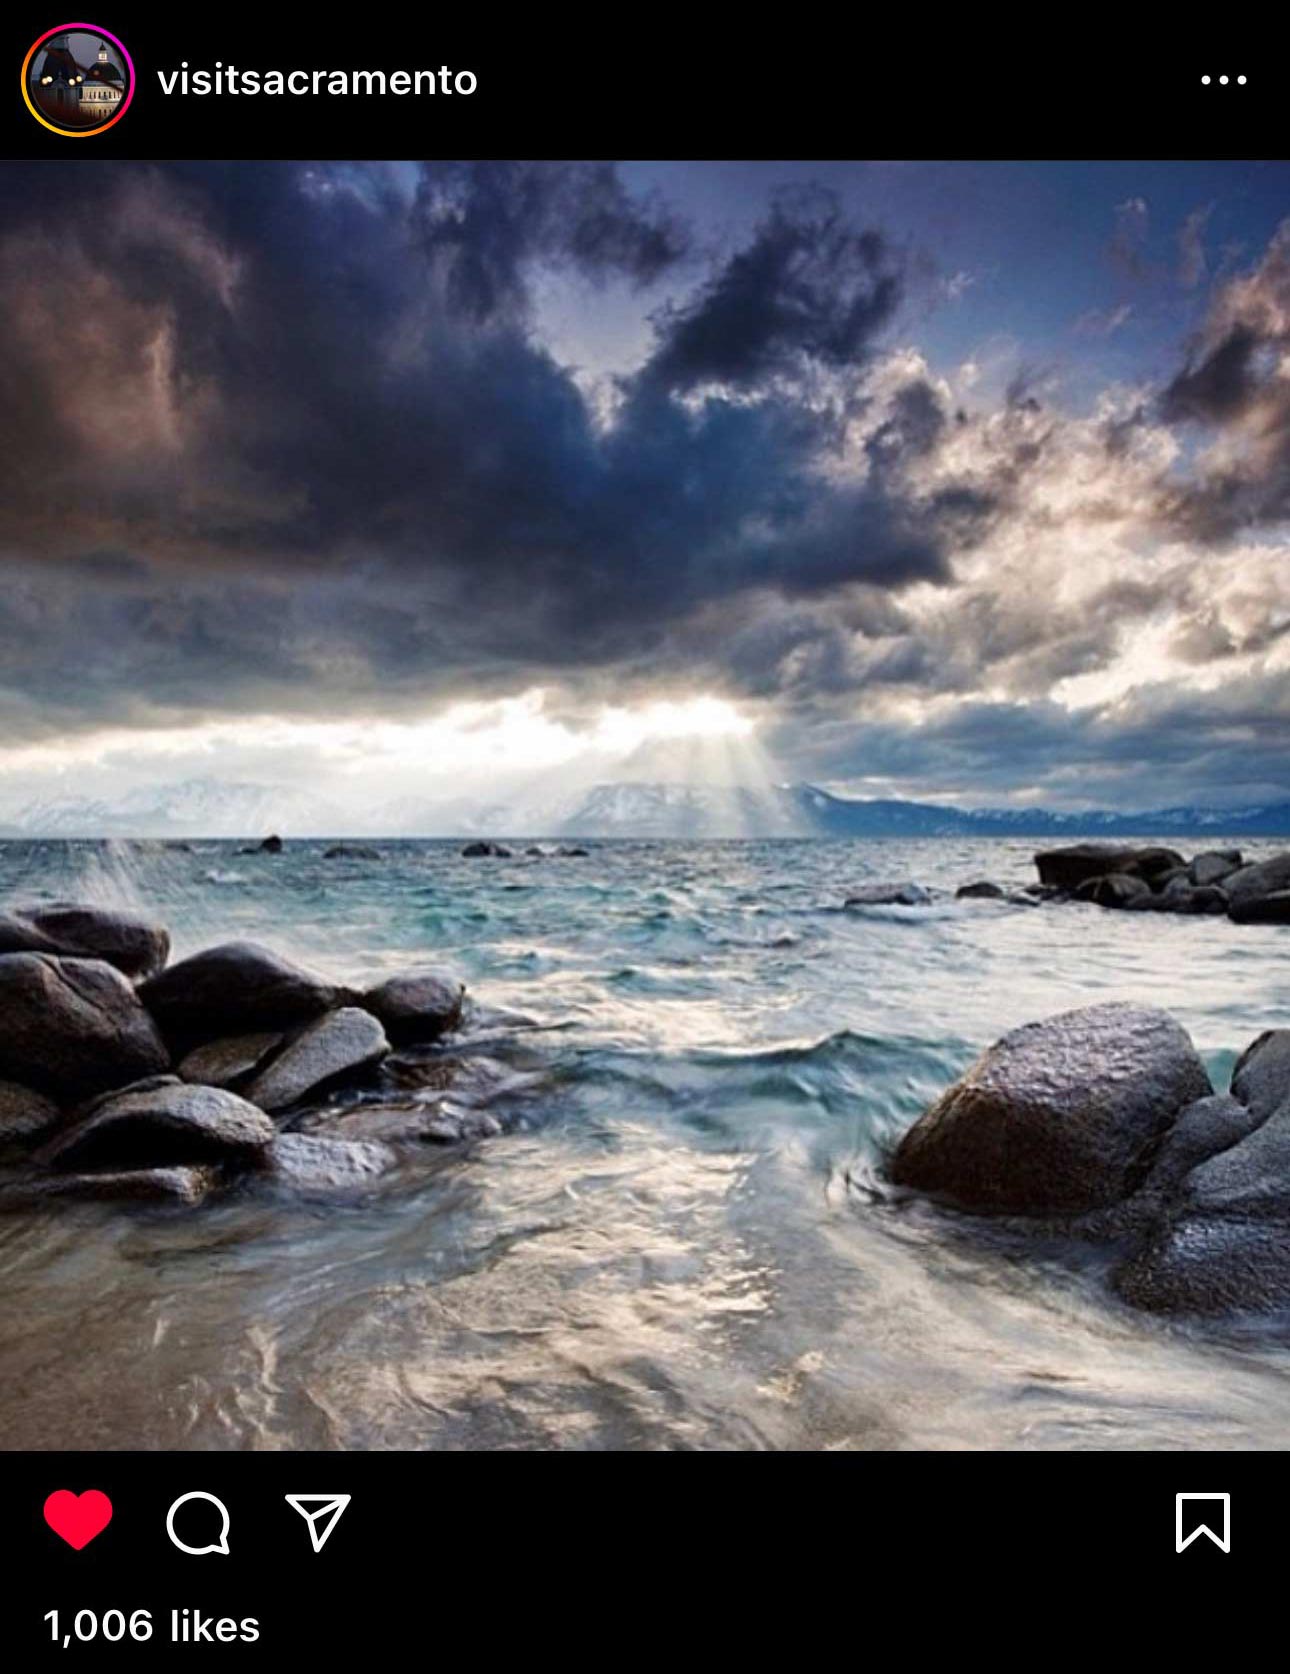 Dramatic clouds over Lake Tahoe in a post shared by Visit Sacramento.